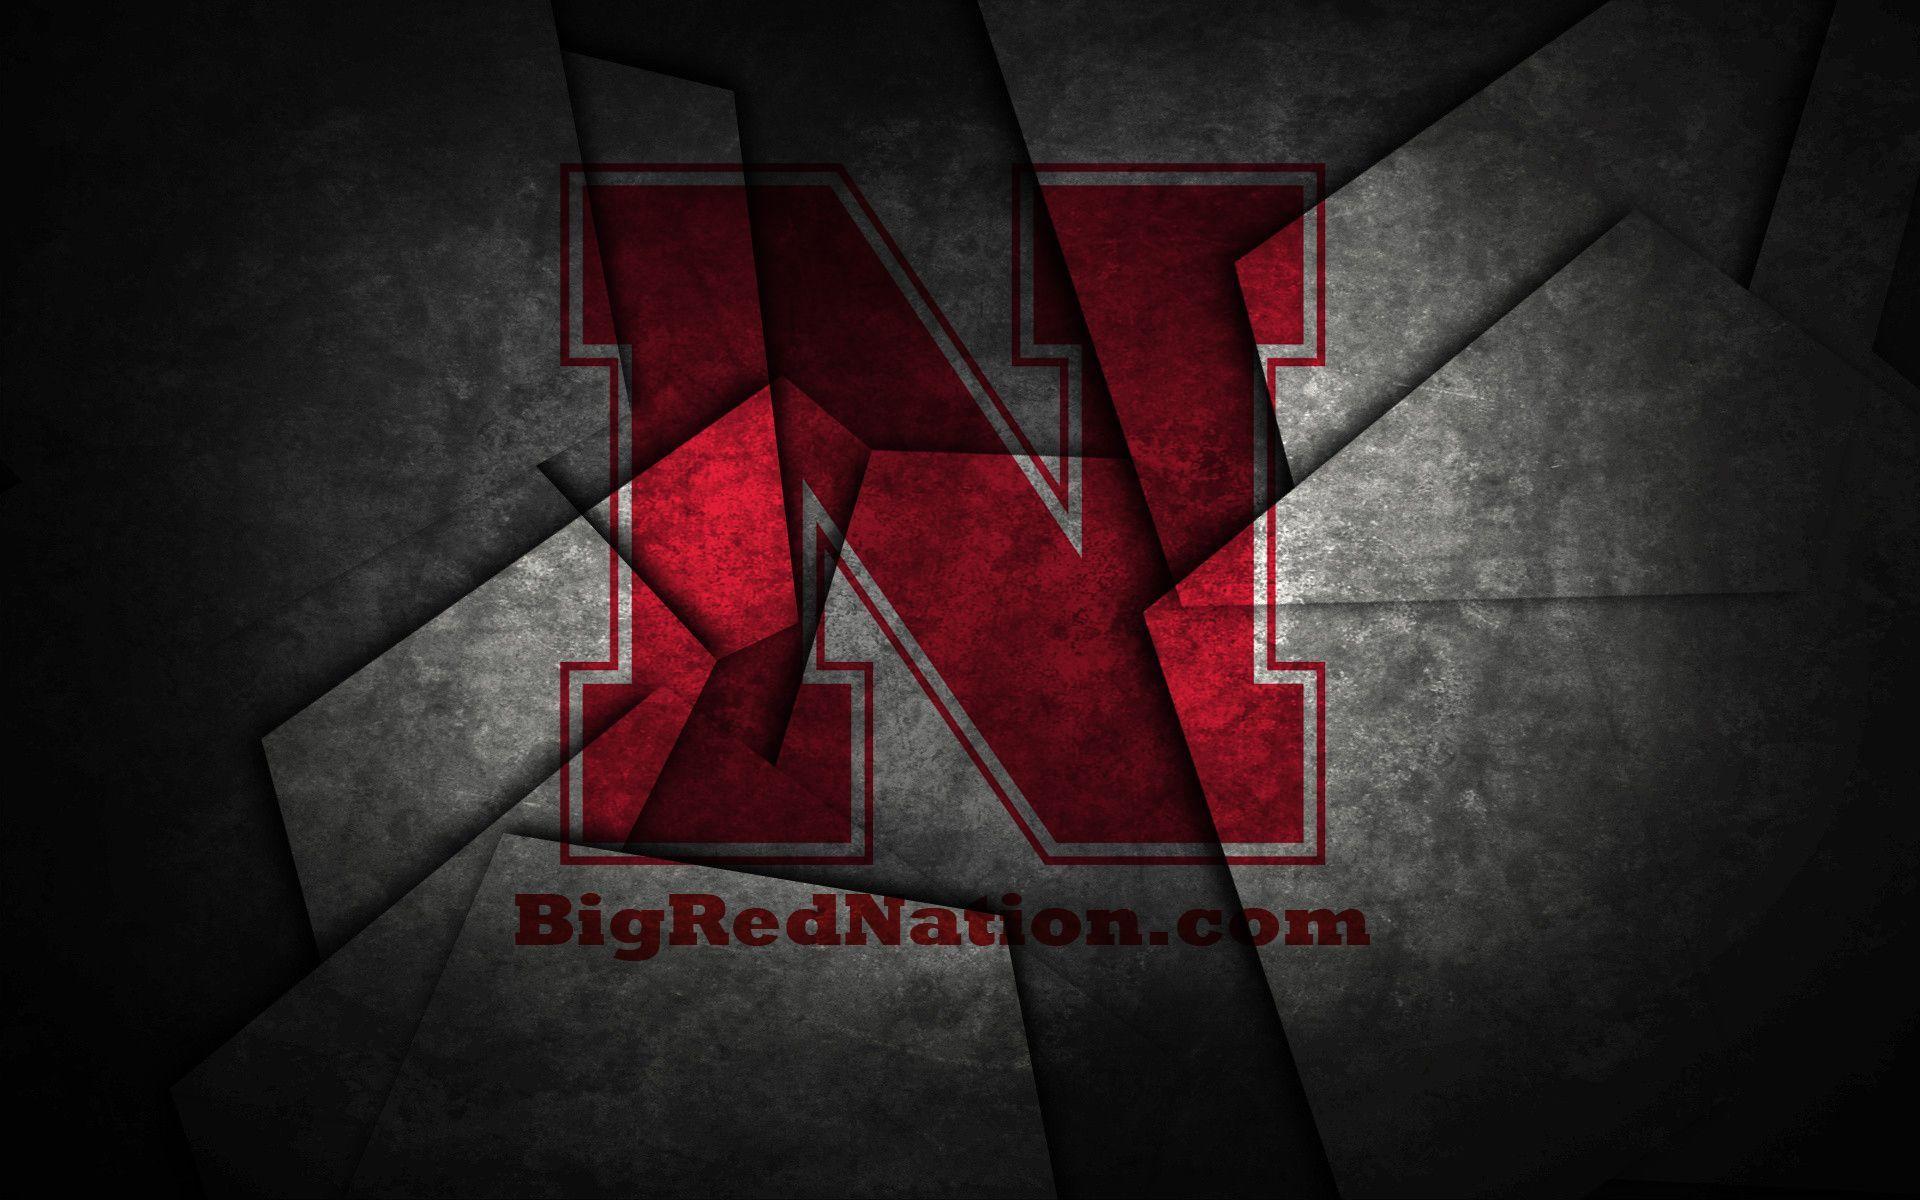 Husker wallpaper android Gallery